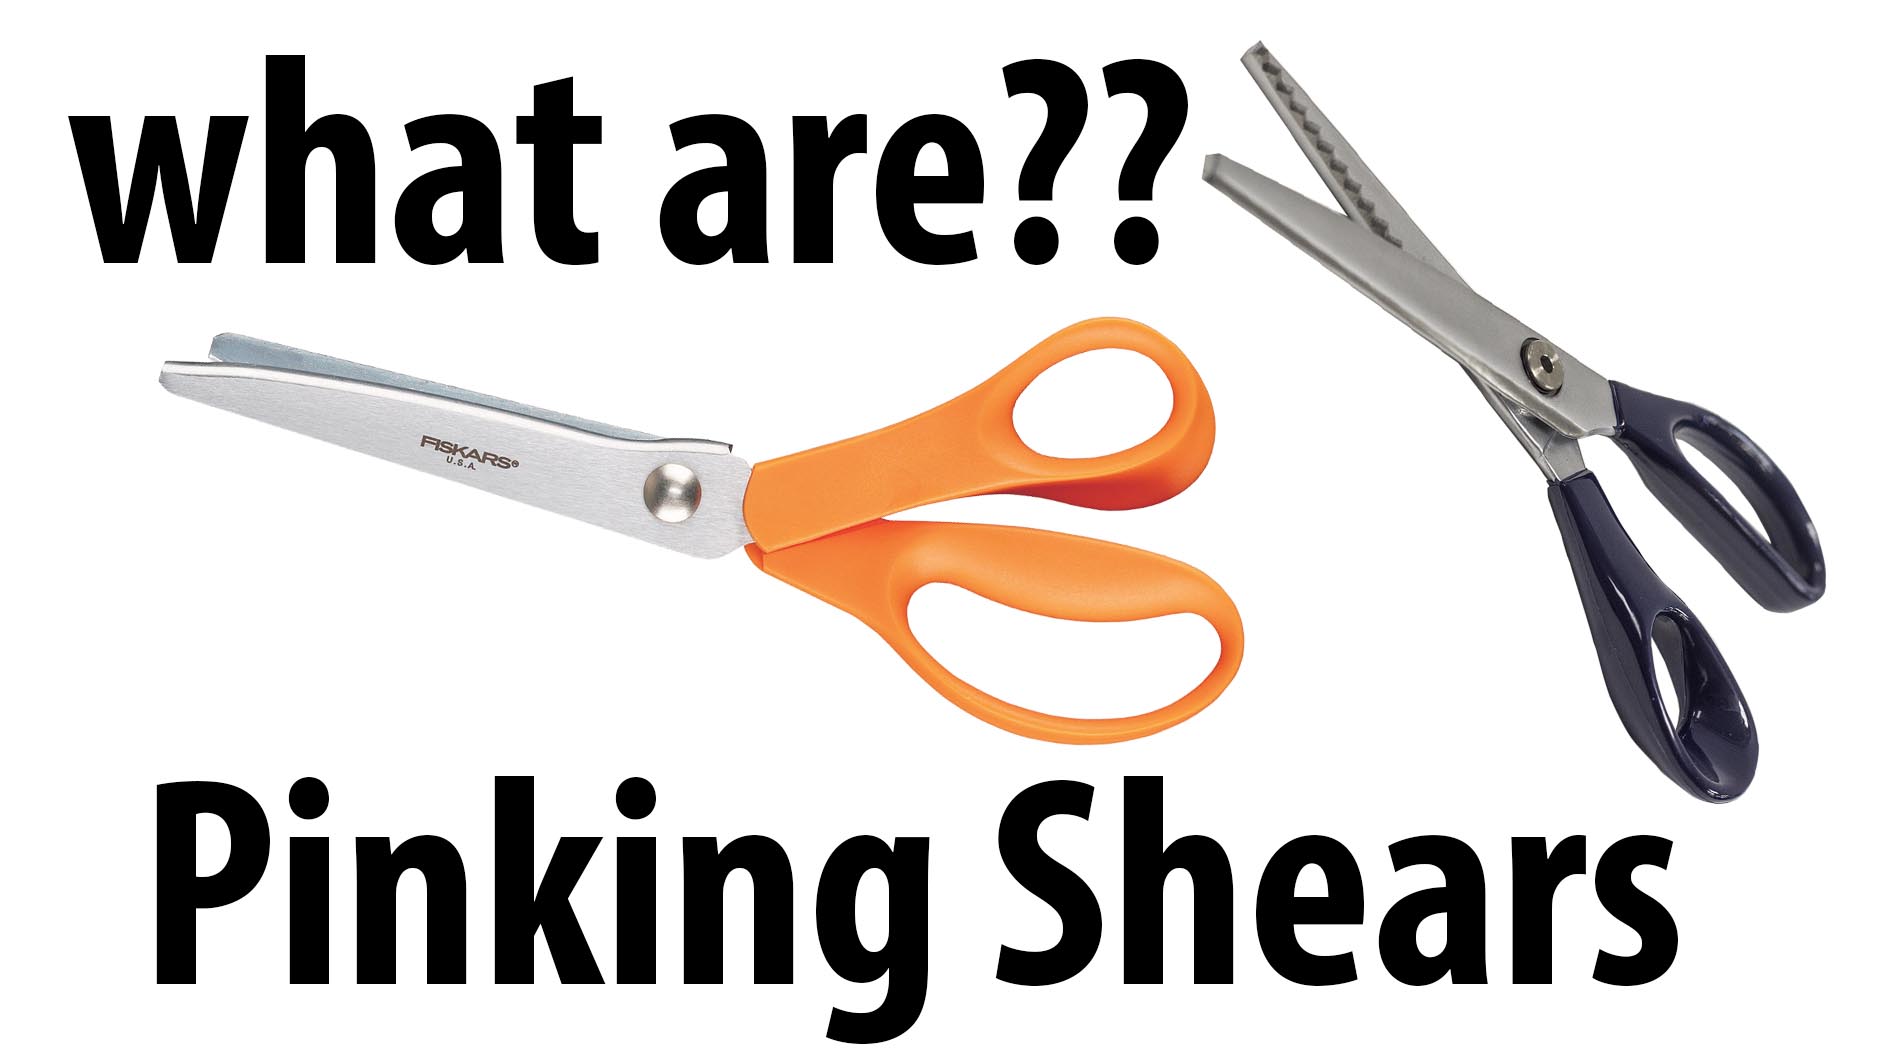 Pinking Shears what are they?